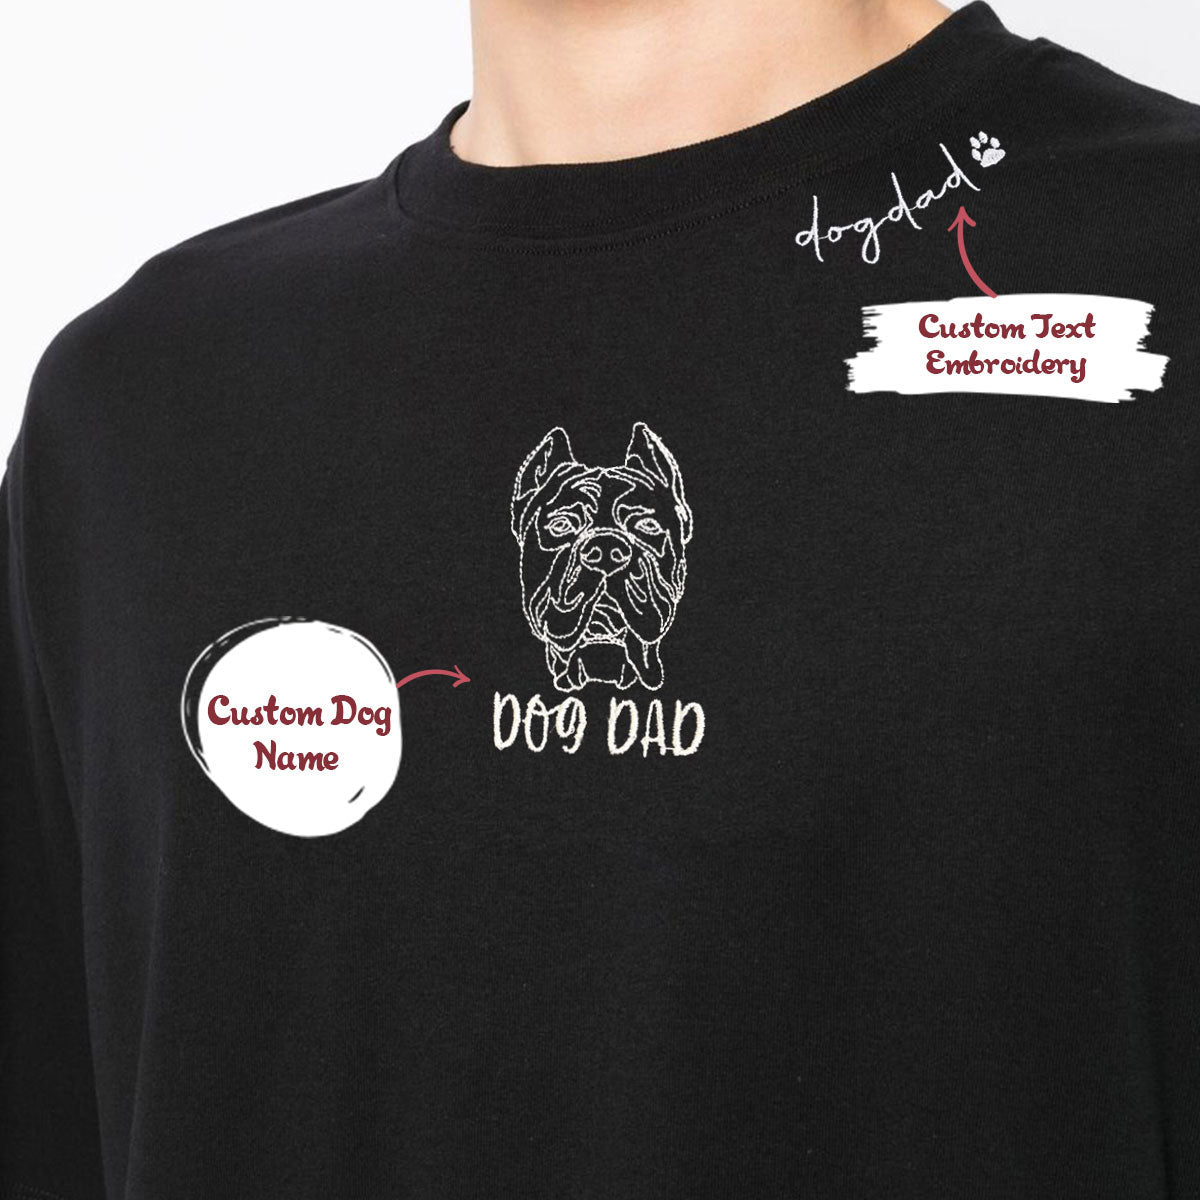 Personalized Cane Corso Dog Dad Embroidered Collar Shirt, Custom Shirt with Dog Name, Cane Corso Gifts Dog Lovers